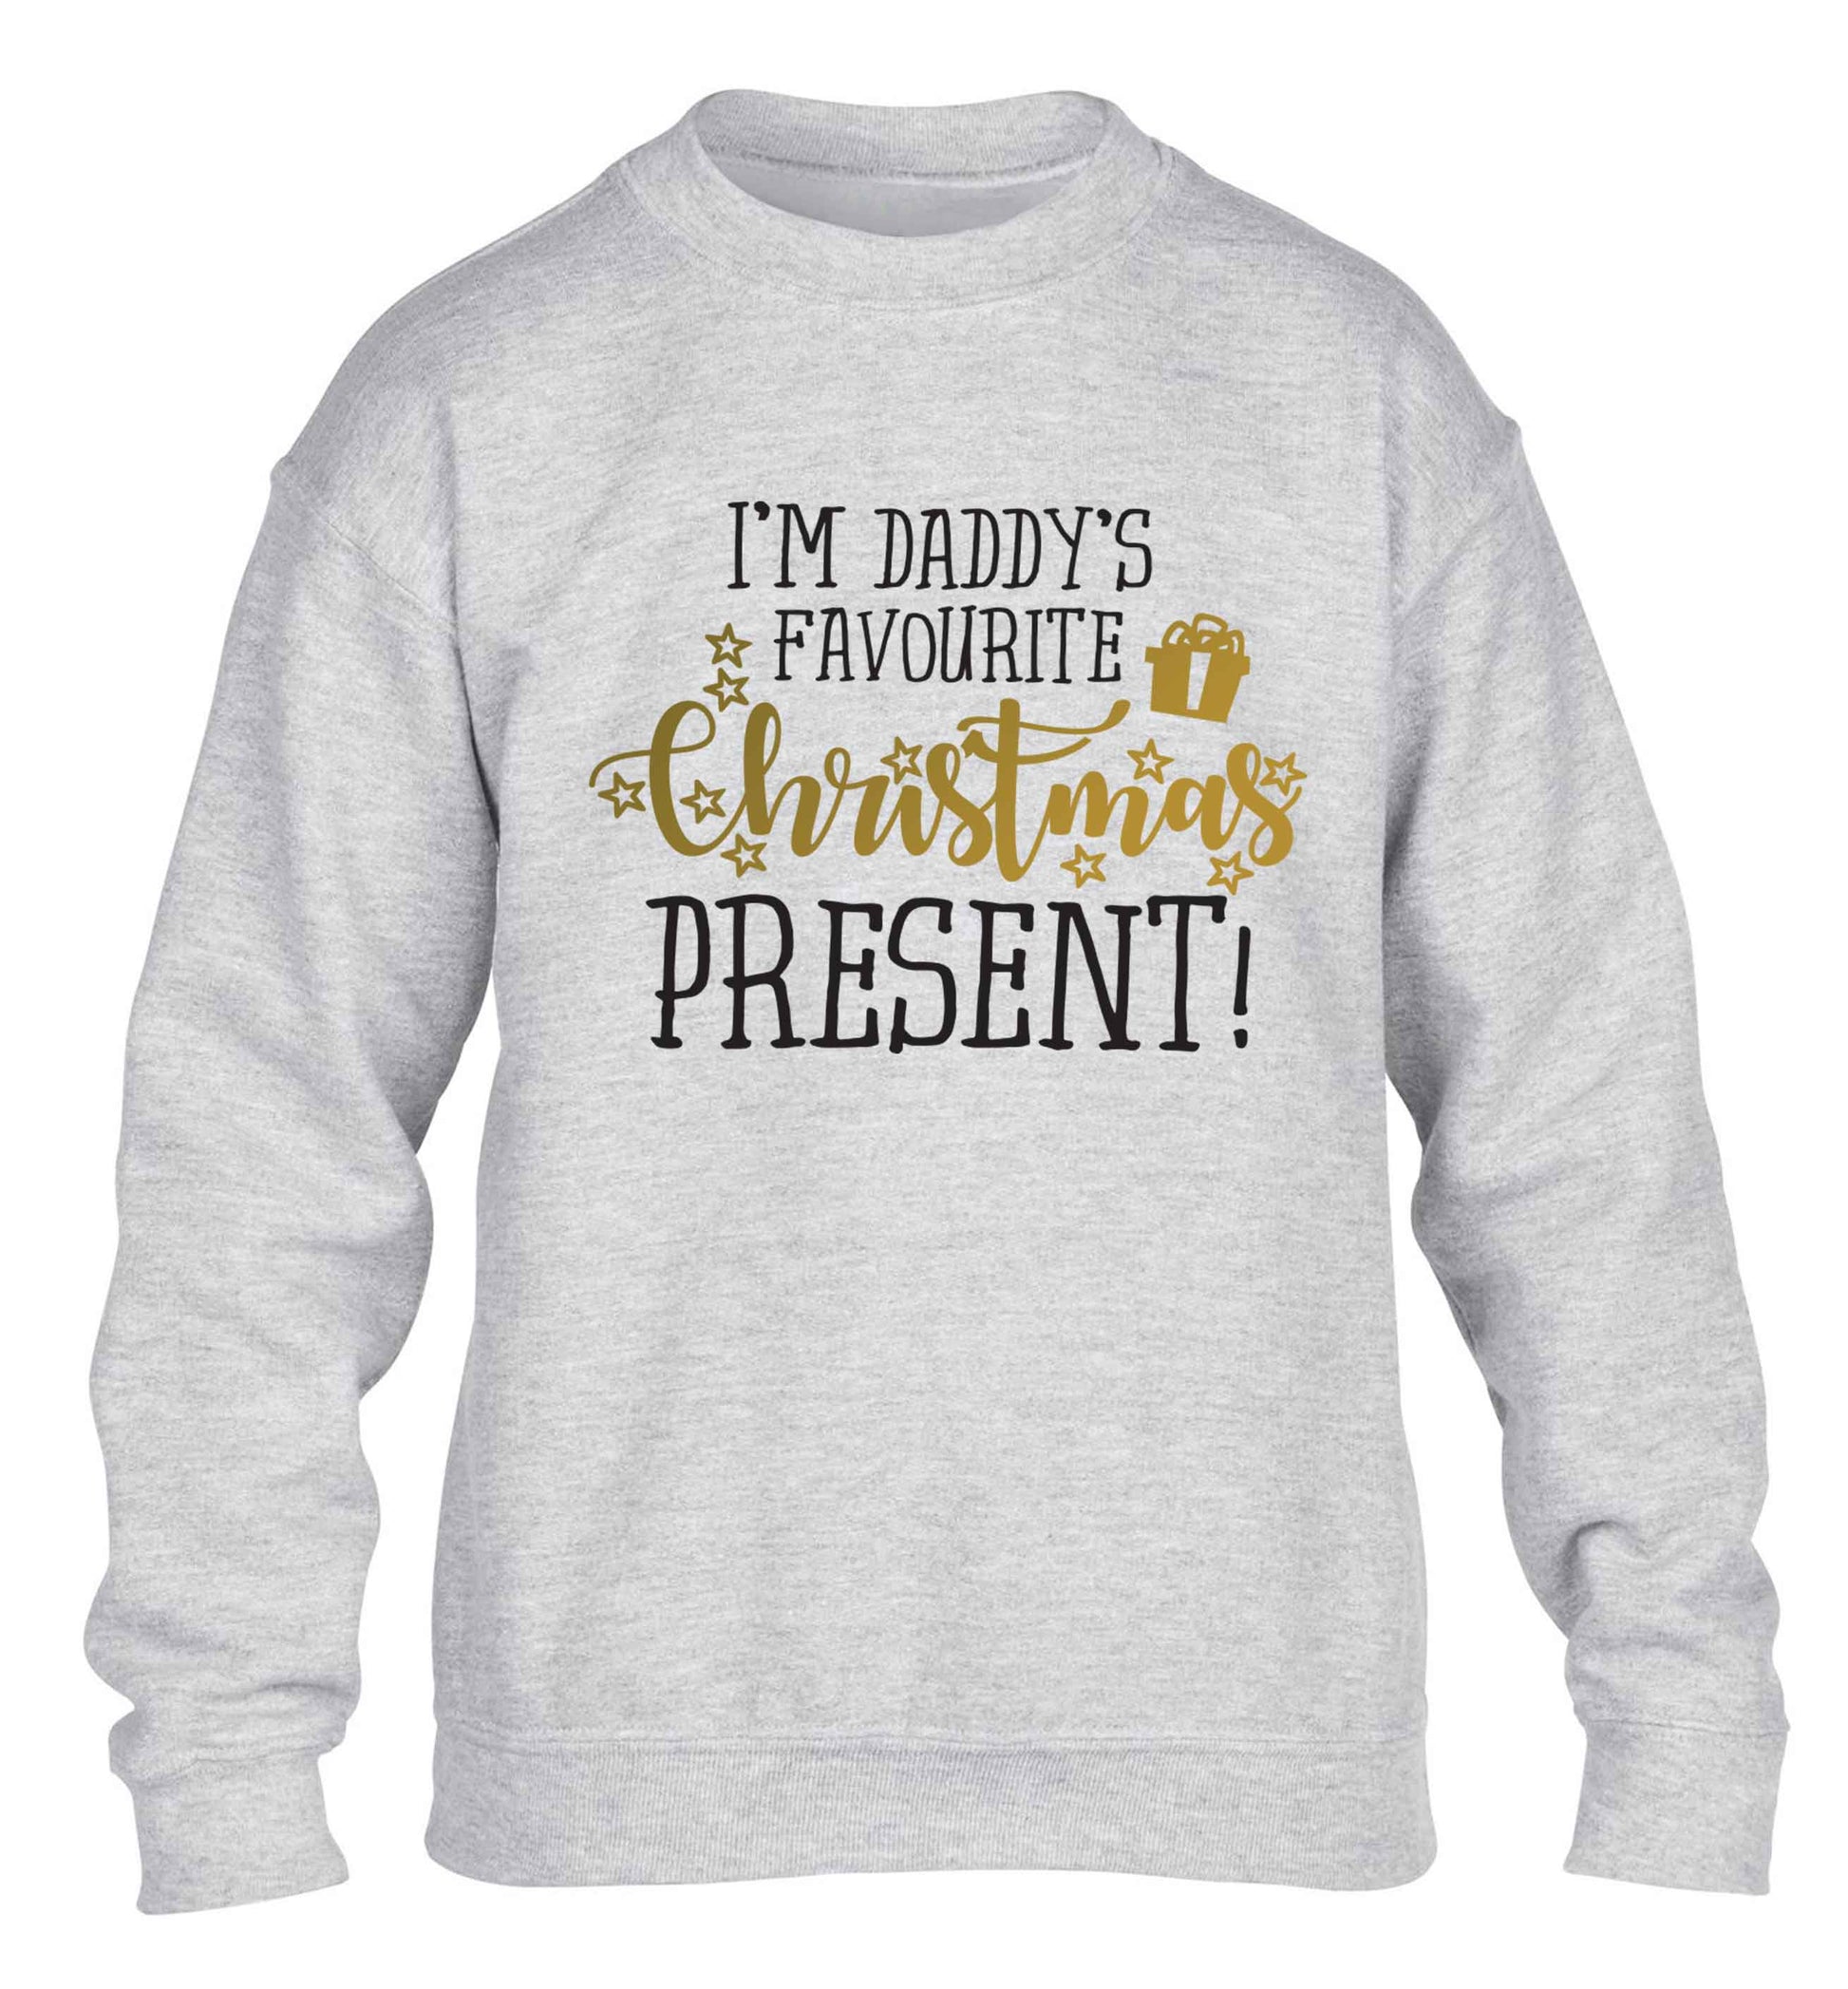 Daddy's favourite Christmas present children's grey sweater 12-13 Years